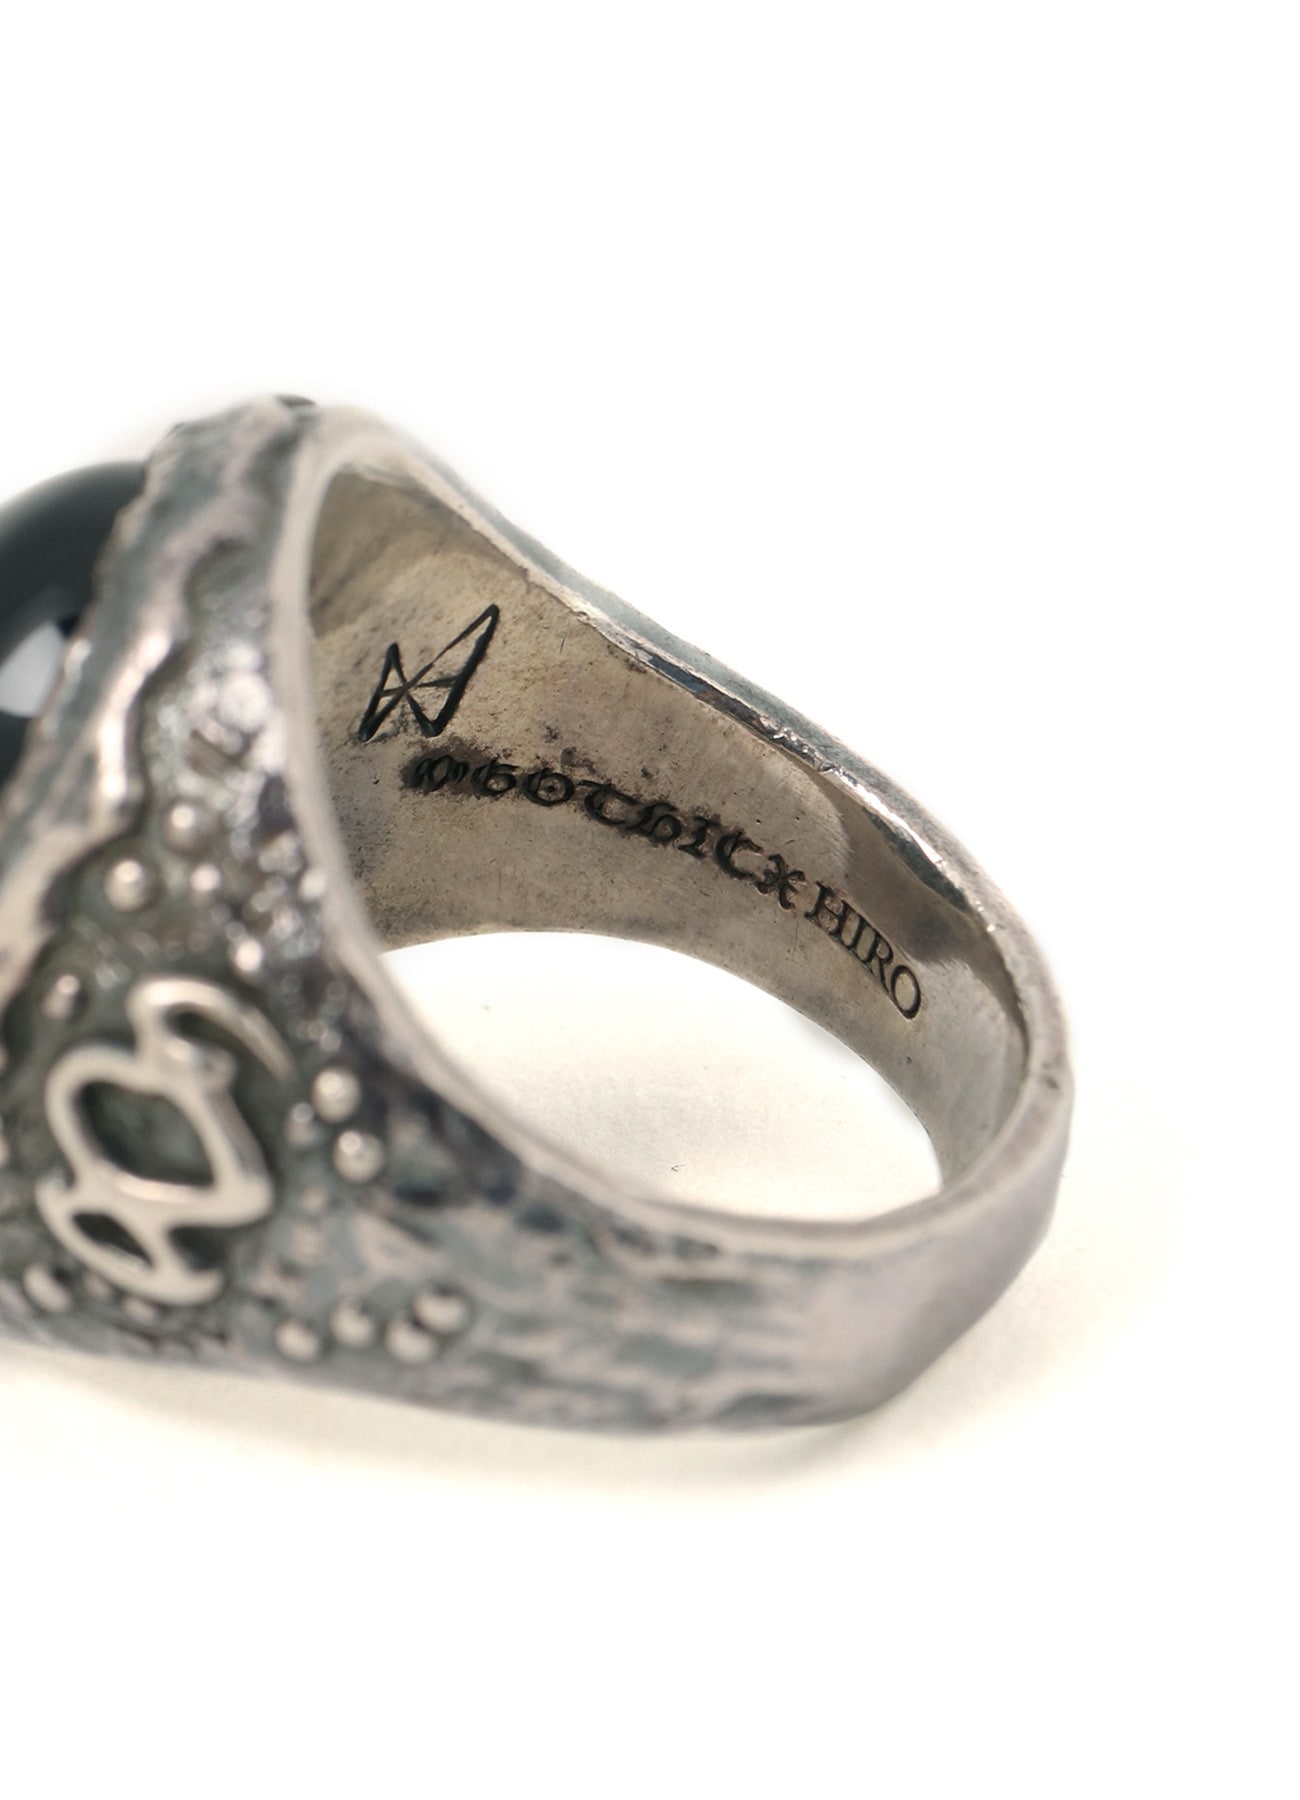 SILVER 950 GOTHIC OVAL RING